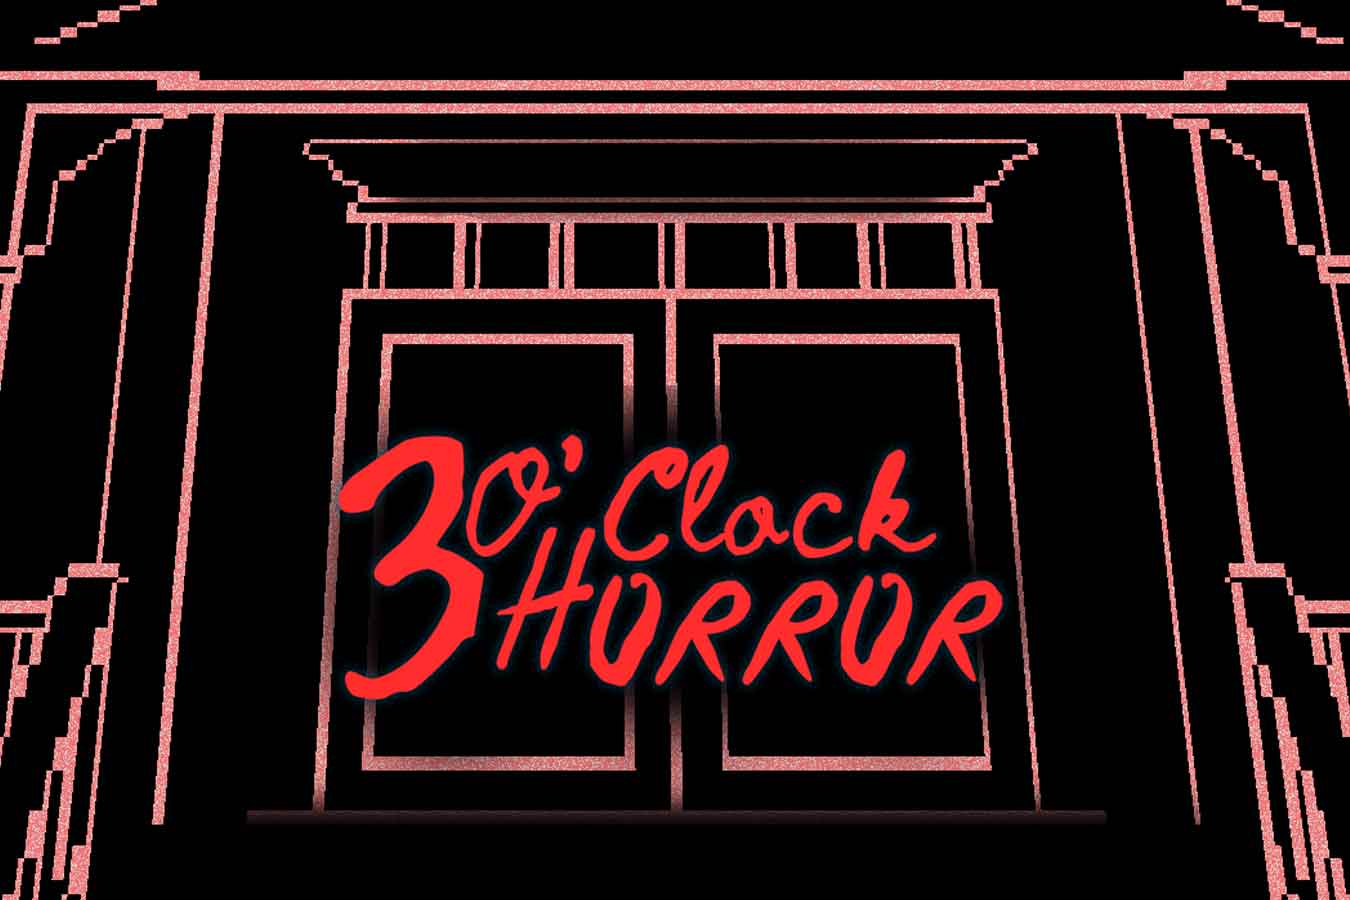 3 O’clock Horror is available for download and play.